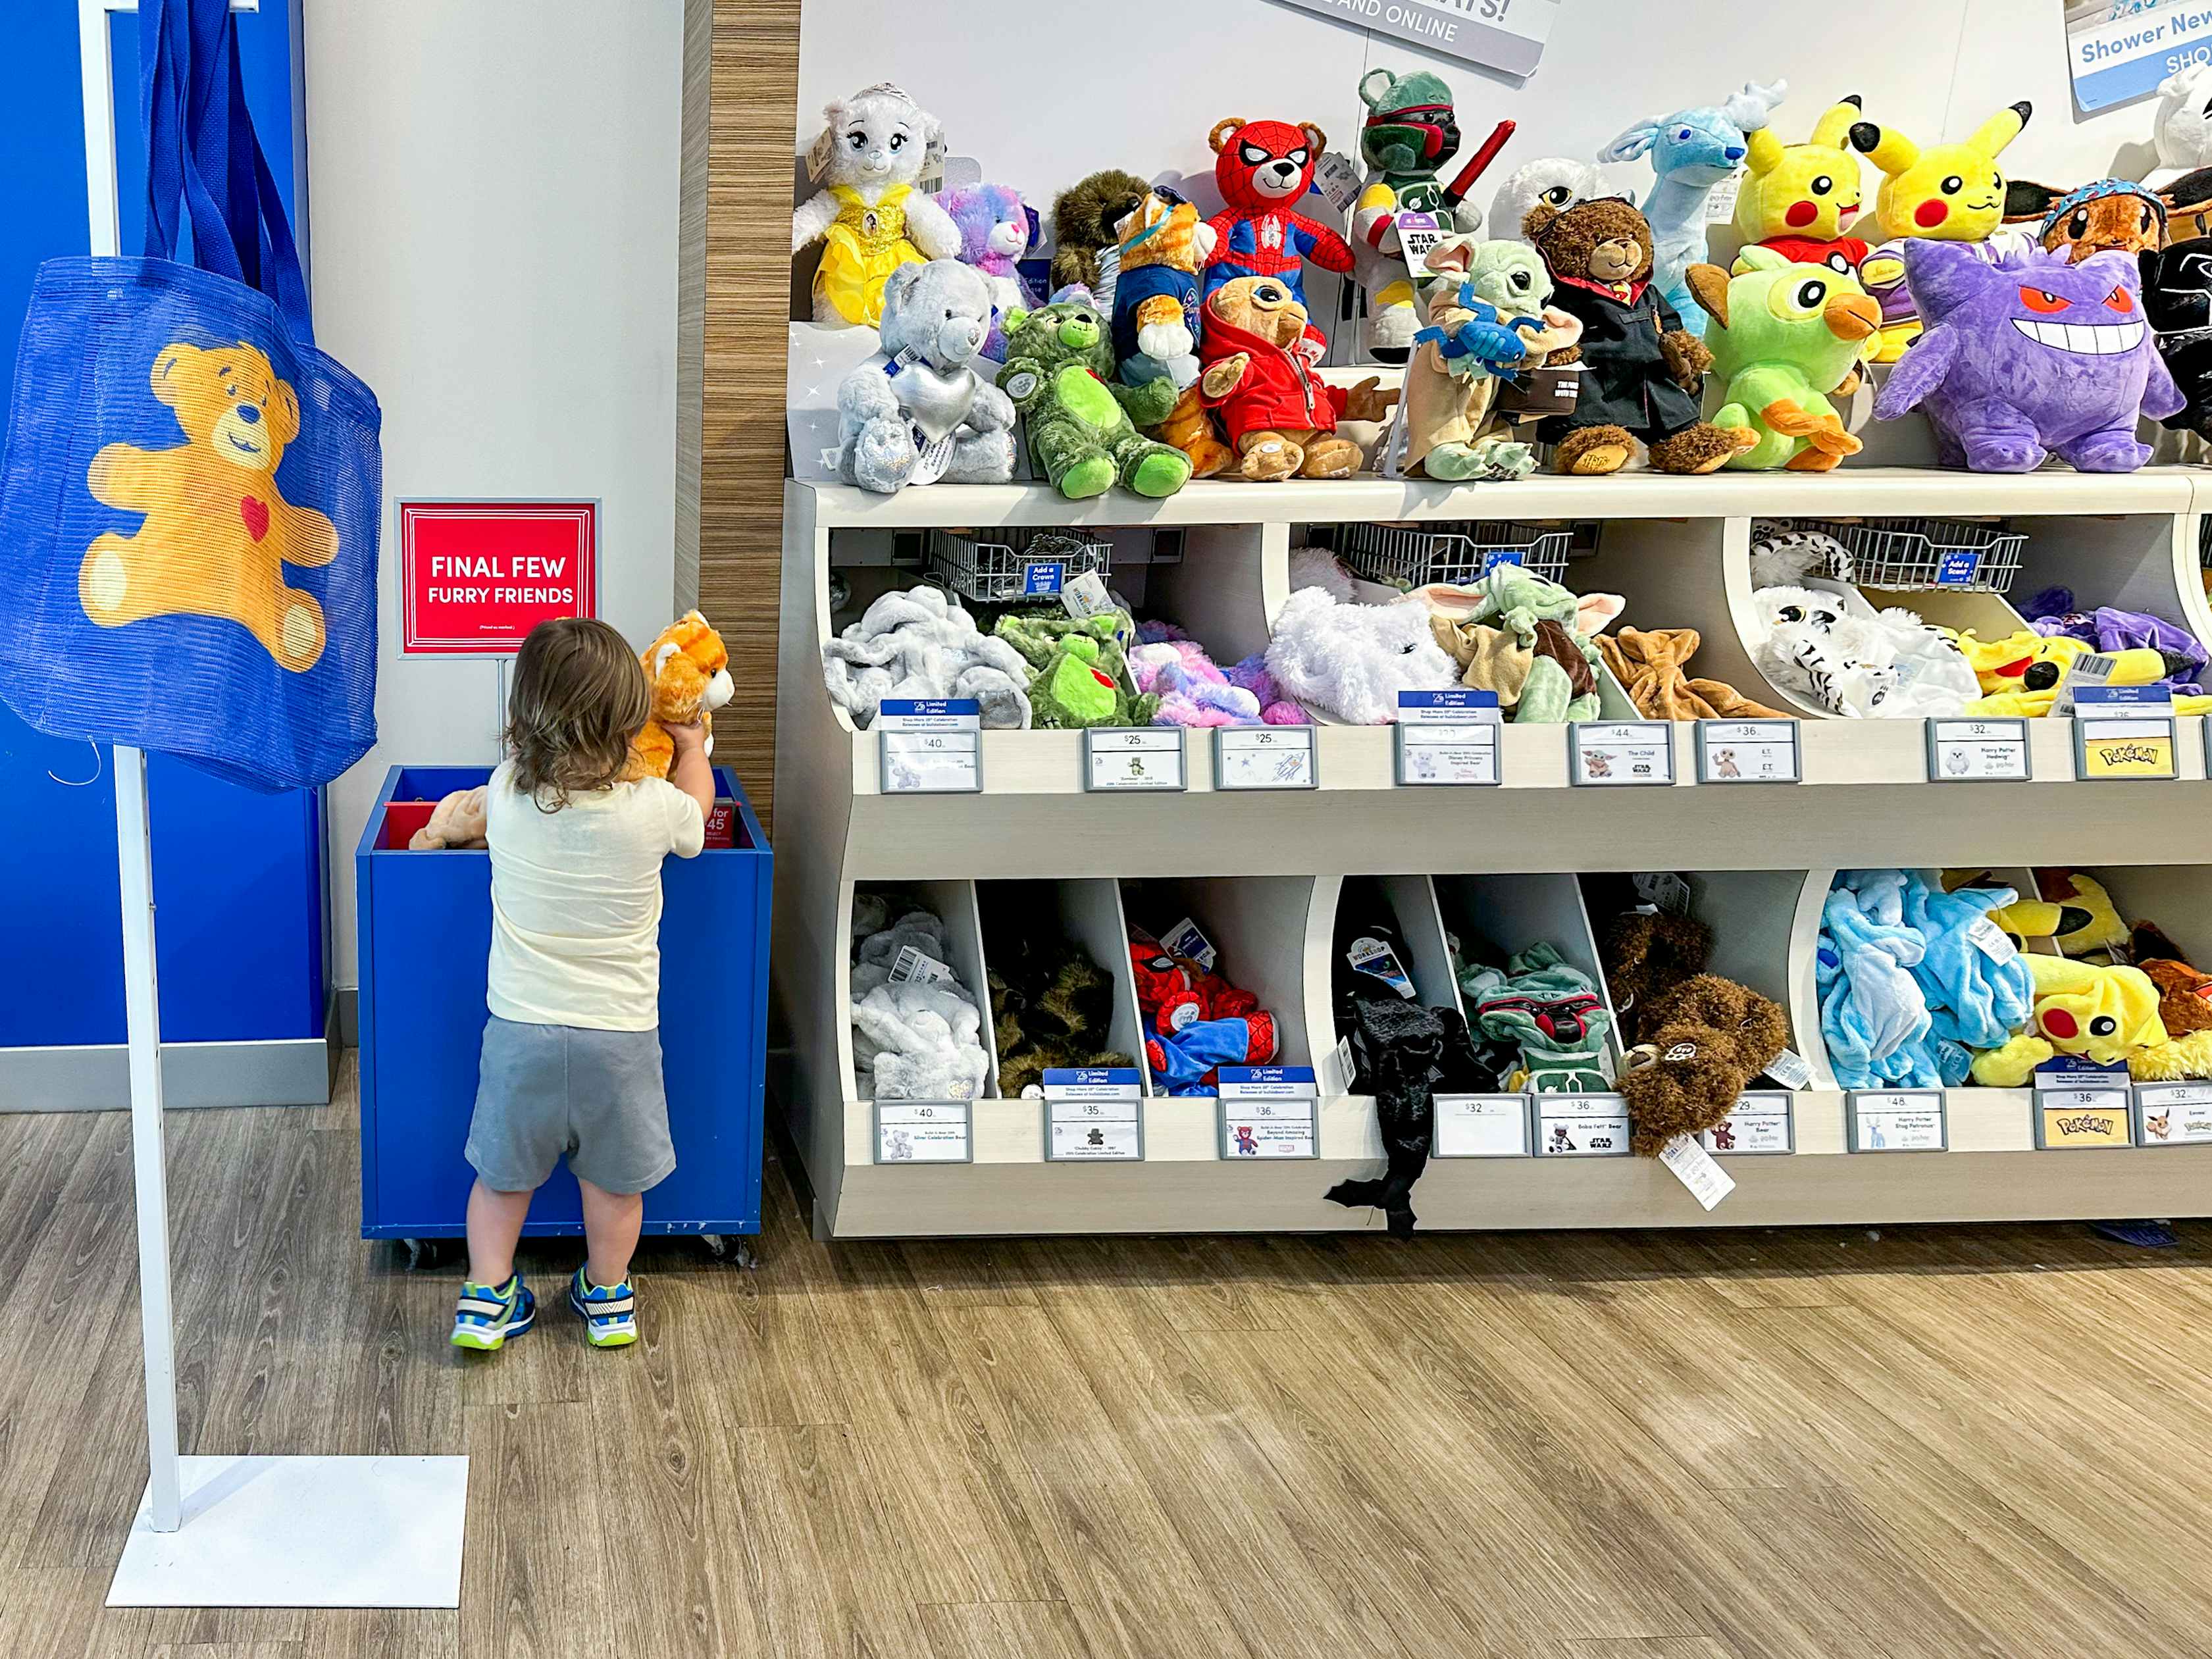 A little kid looking through some Build-A-Bear options on the shelf